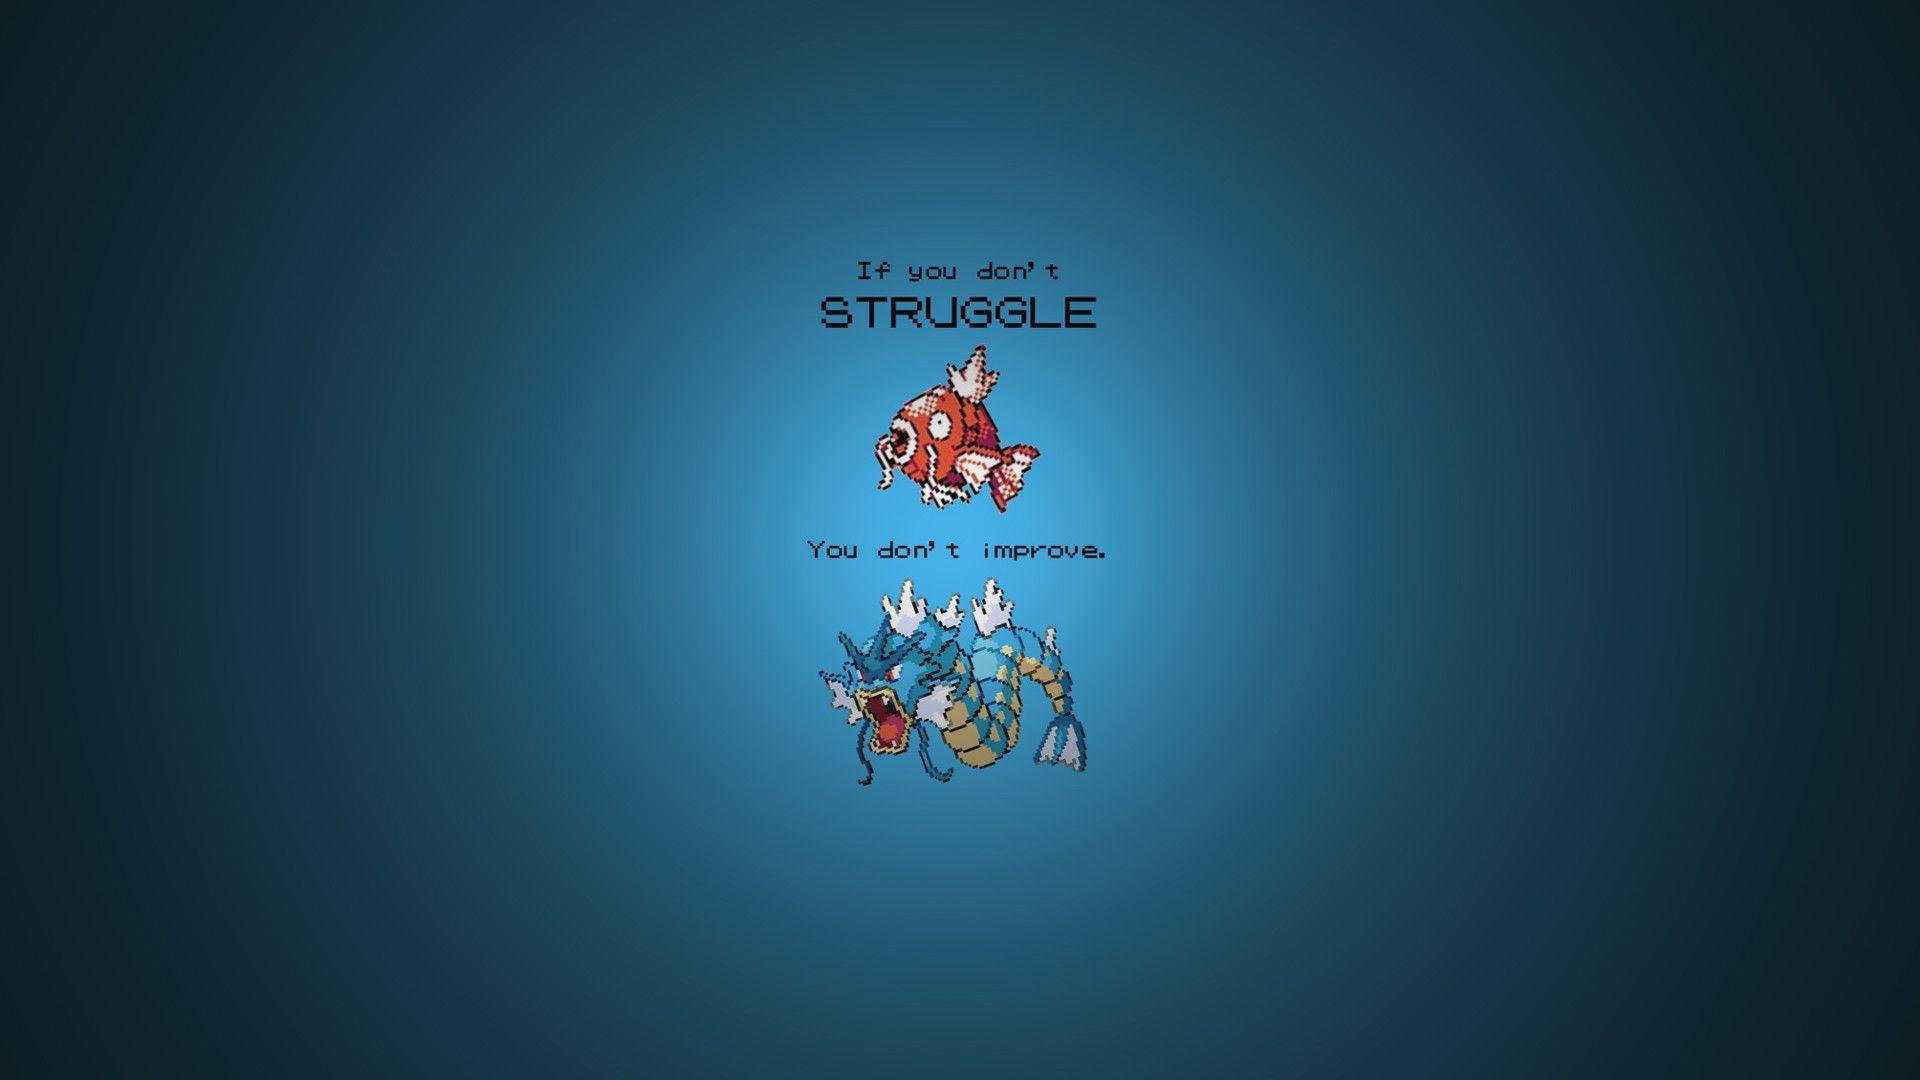 I Made A Wallpaper Out Of A Motivational Magikarp - Graphic Design , HD Wallpaper & Backgrounds